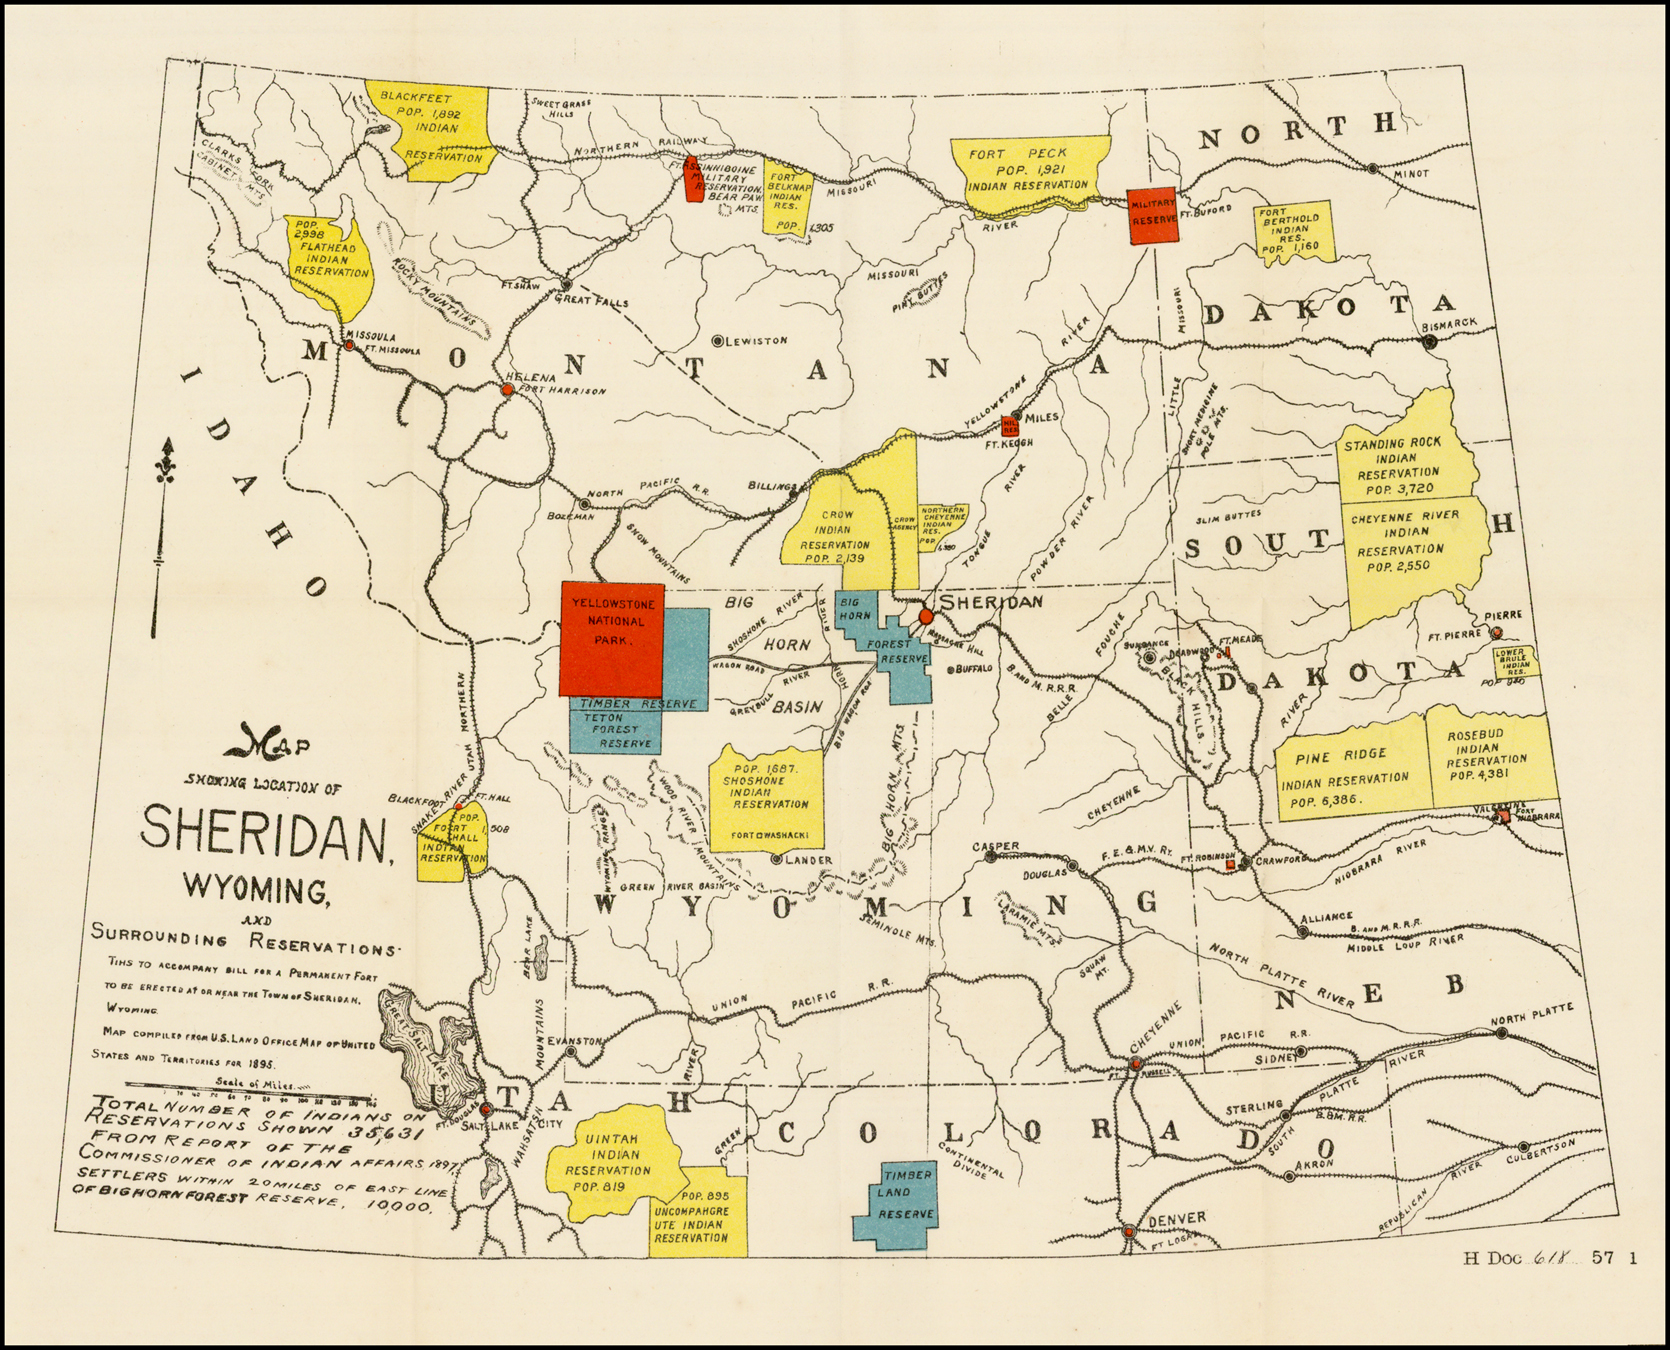 Map Showing Location Of Sheridan Wyoming And Surrounding